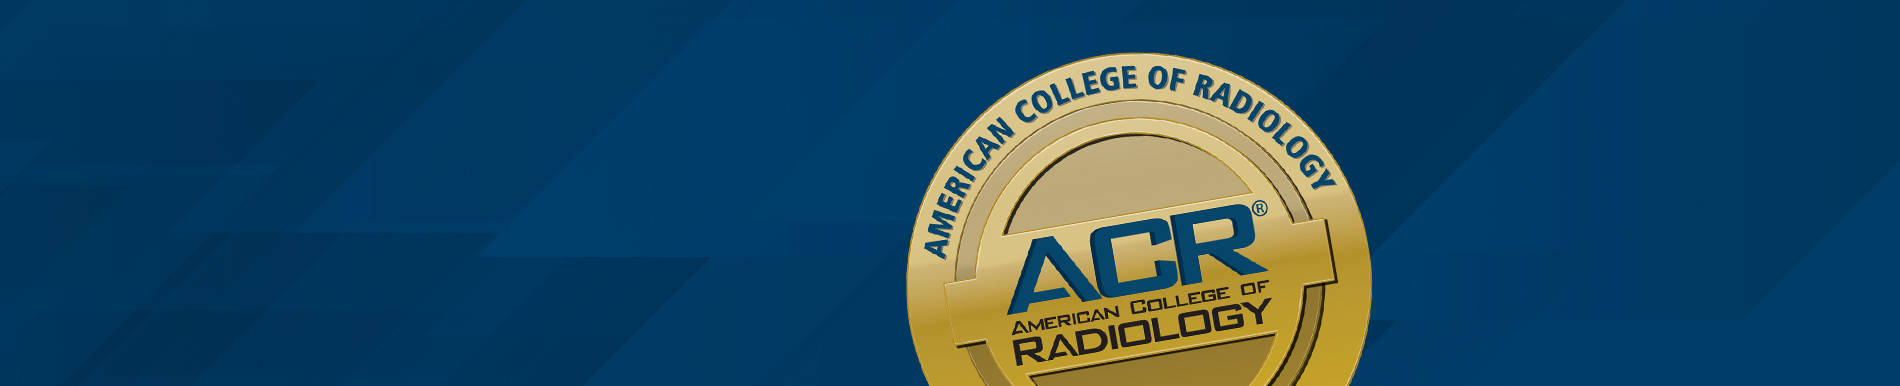 ACR Accreditation gold seal on a dark blue background